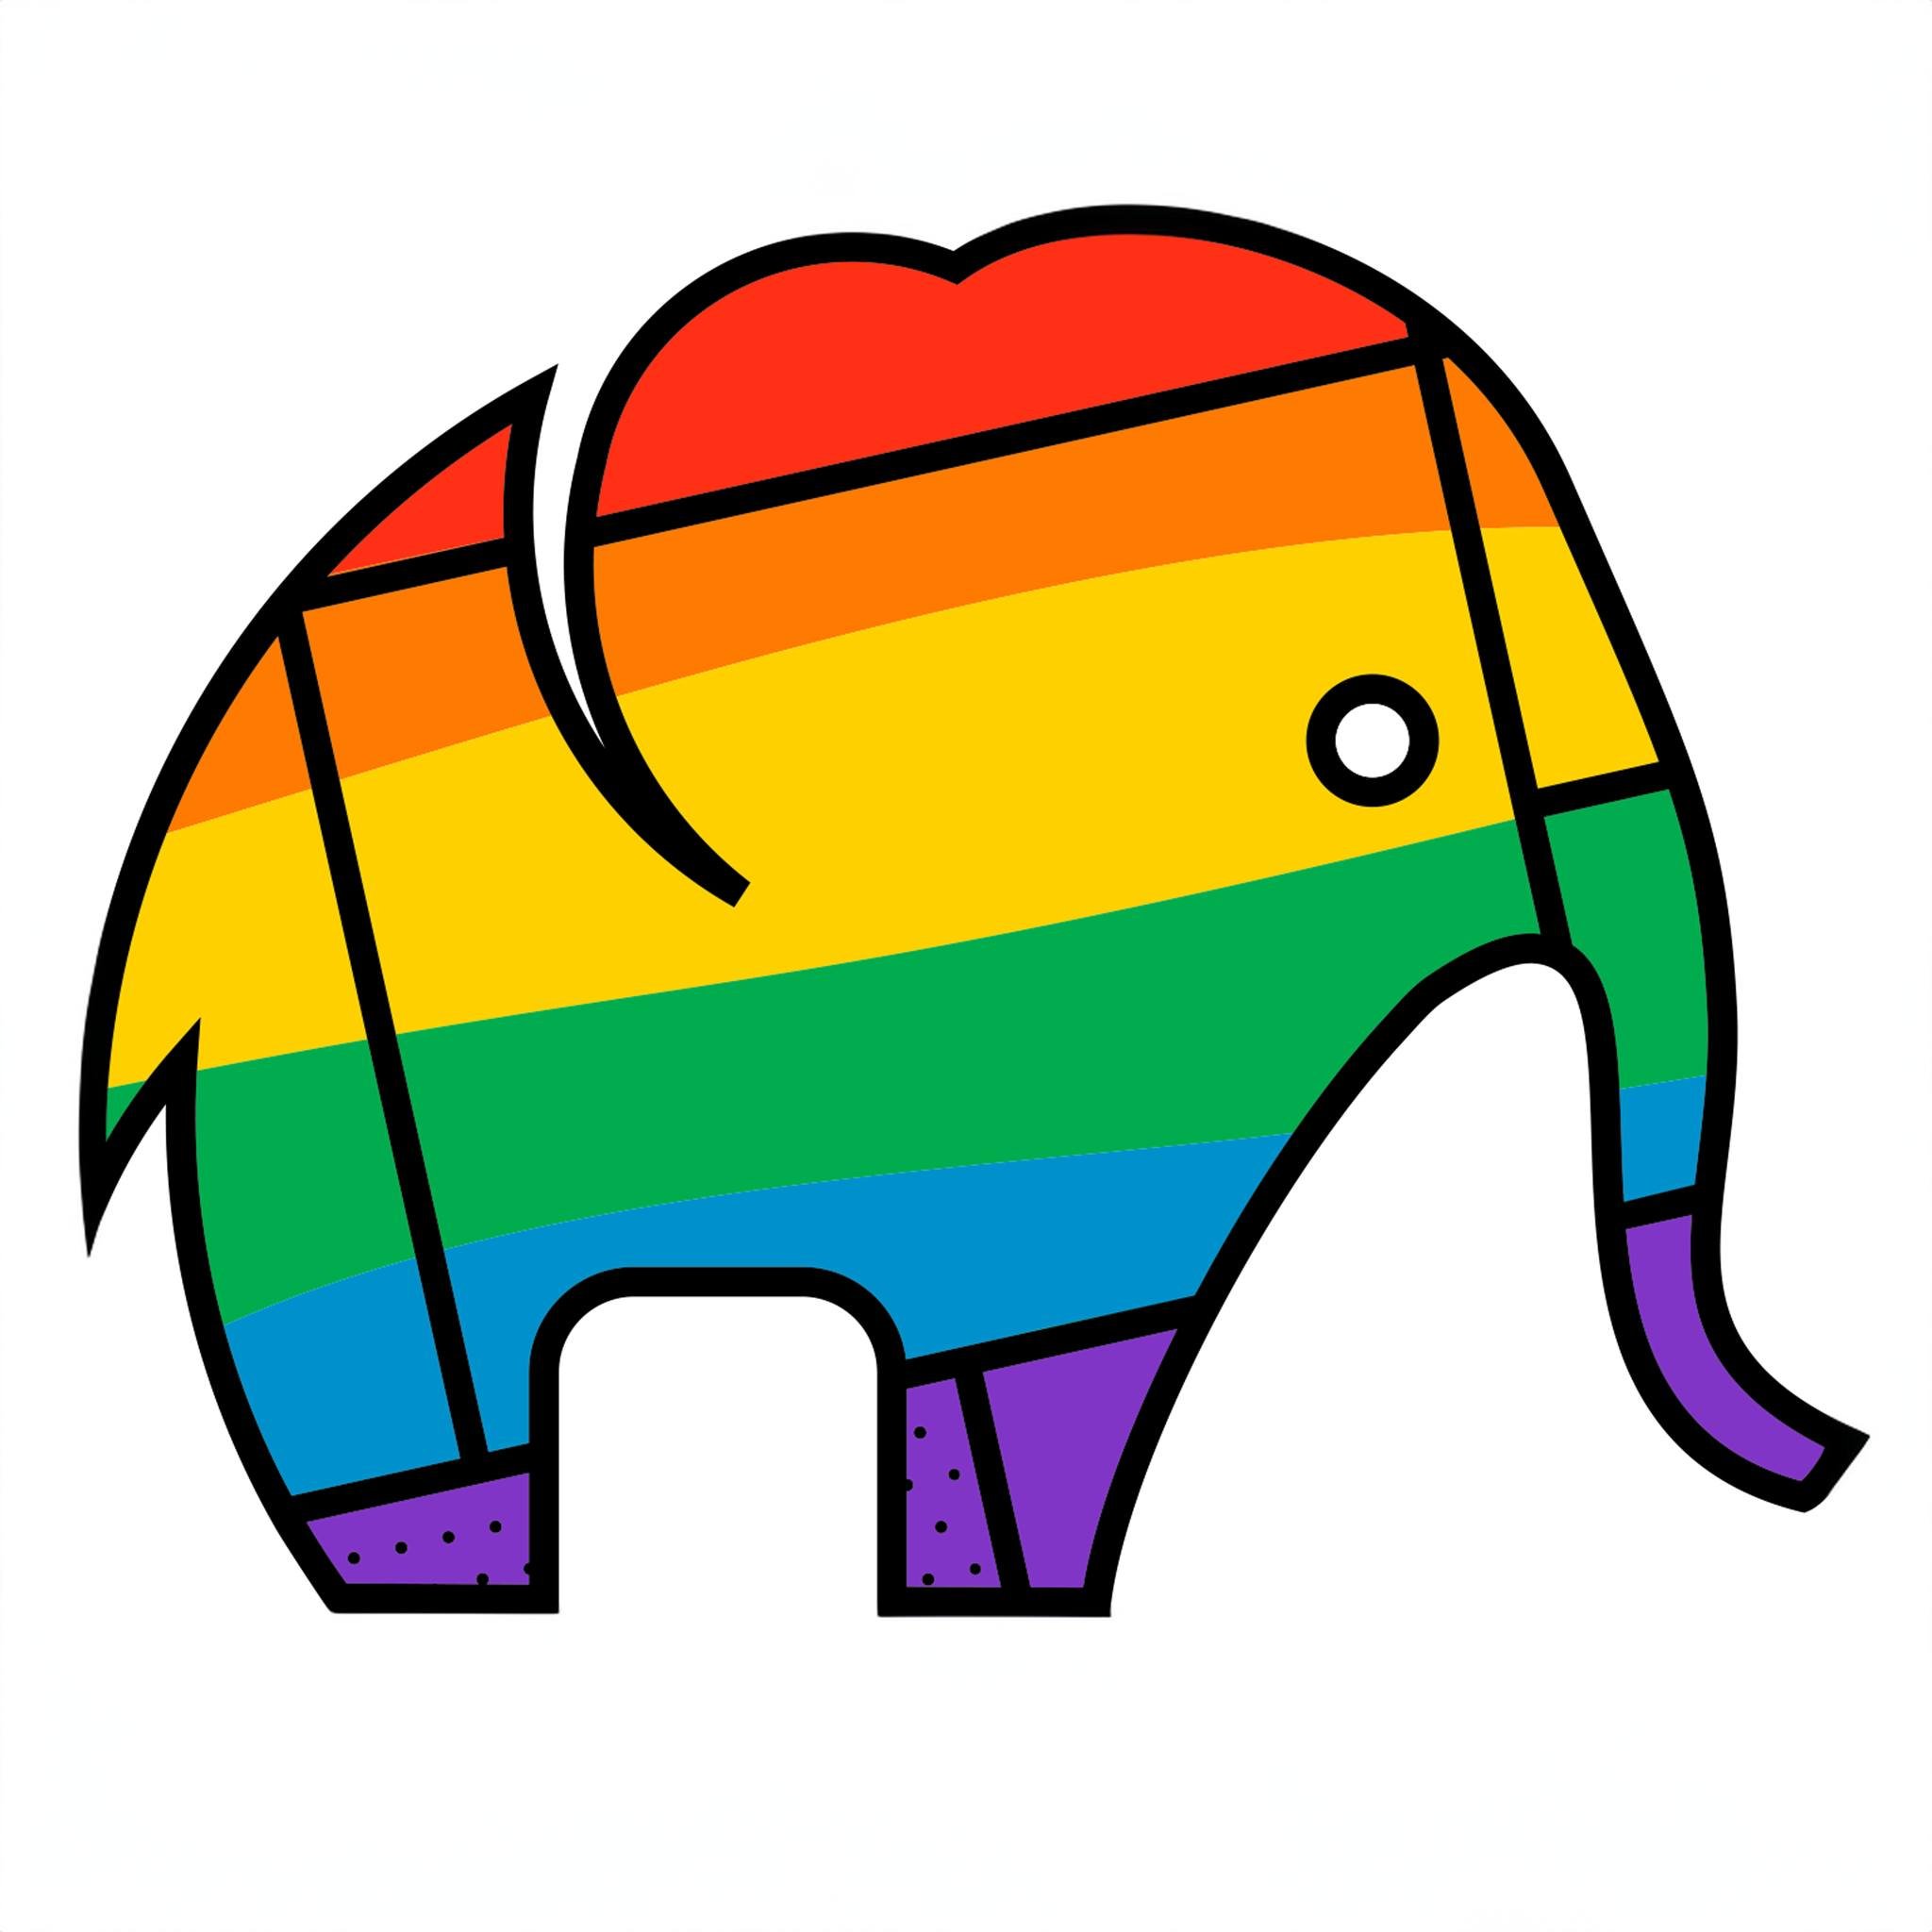 Today, on International Day Against Homophobia, Transphobia, and Biphobia, we at Elephant In The Room Movement (EITRM) reaffirm our commitment to fostering inclusive and supportive workplaces. Mental health struggles can be exacerbated by discriminat